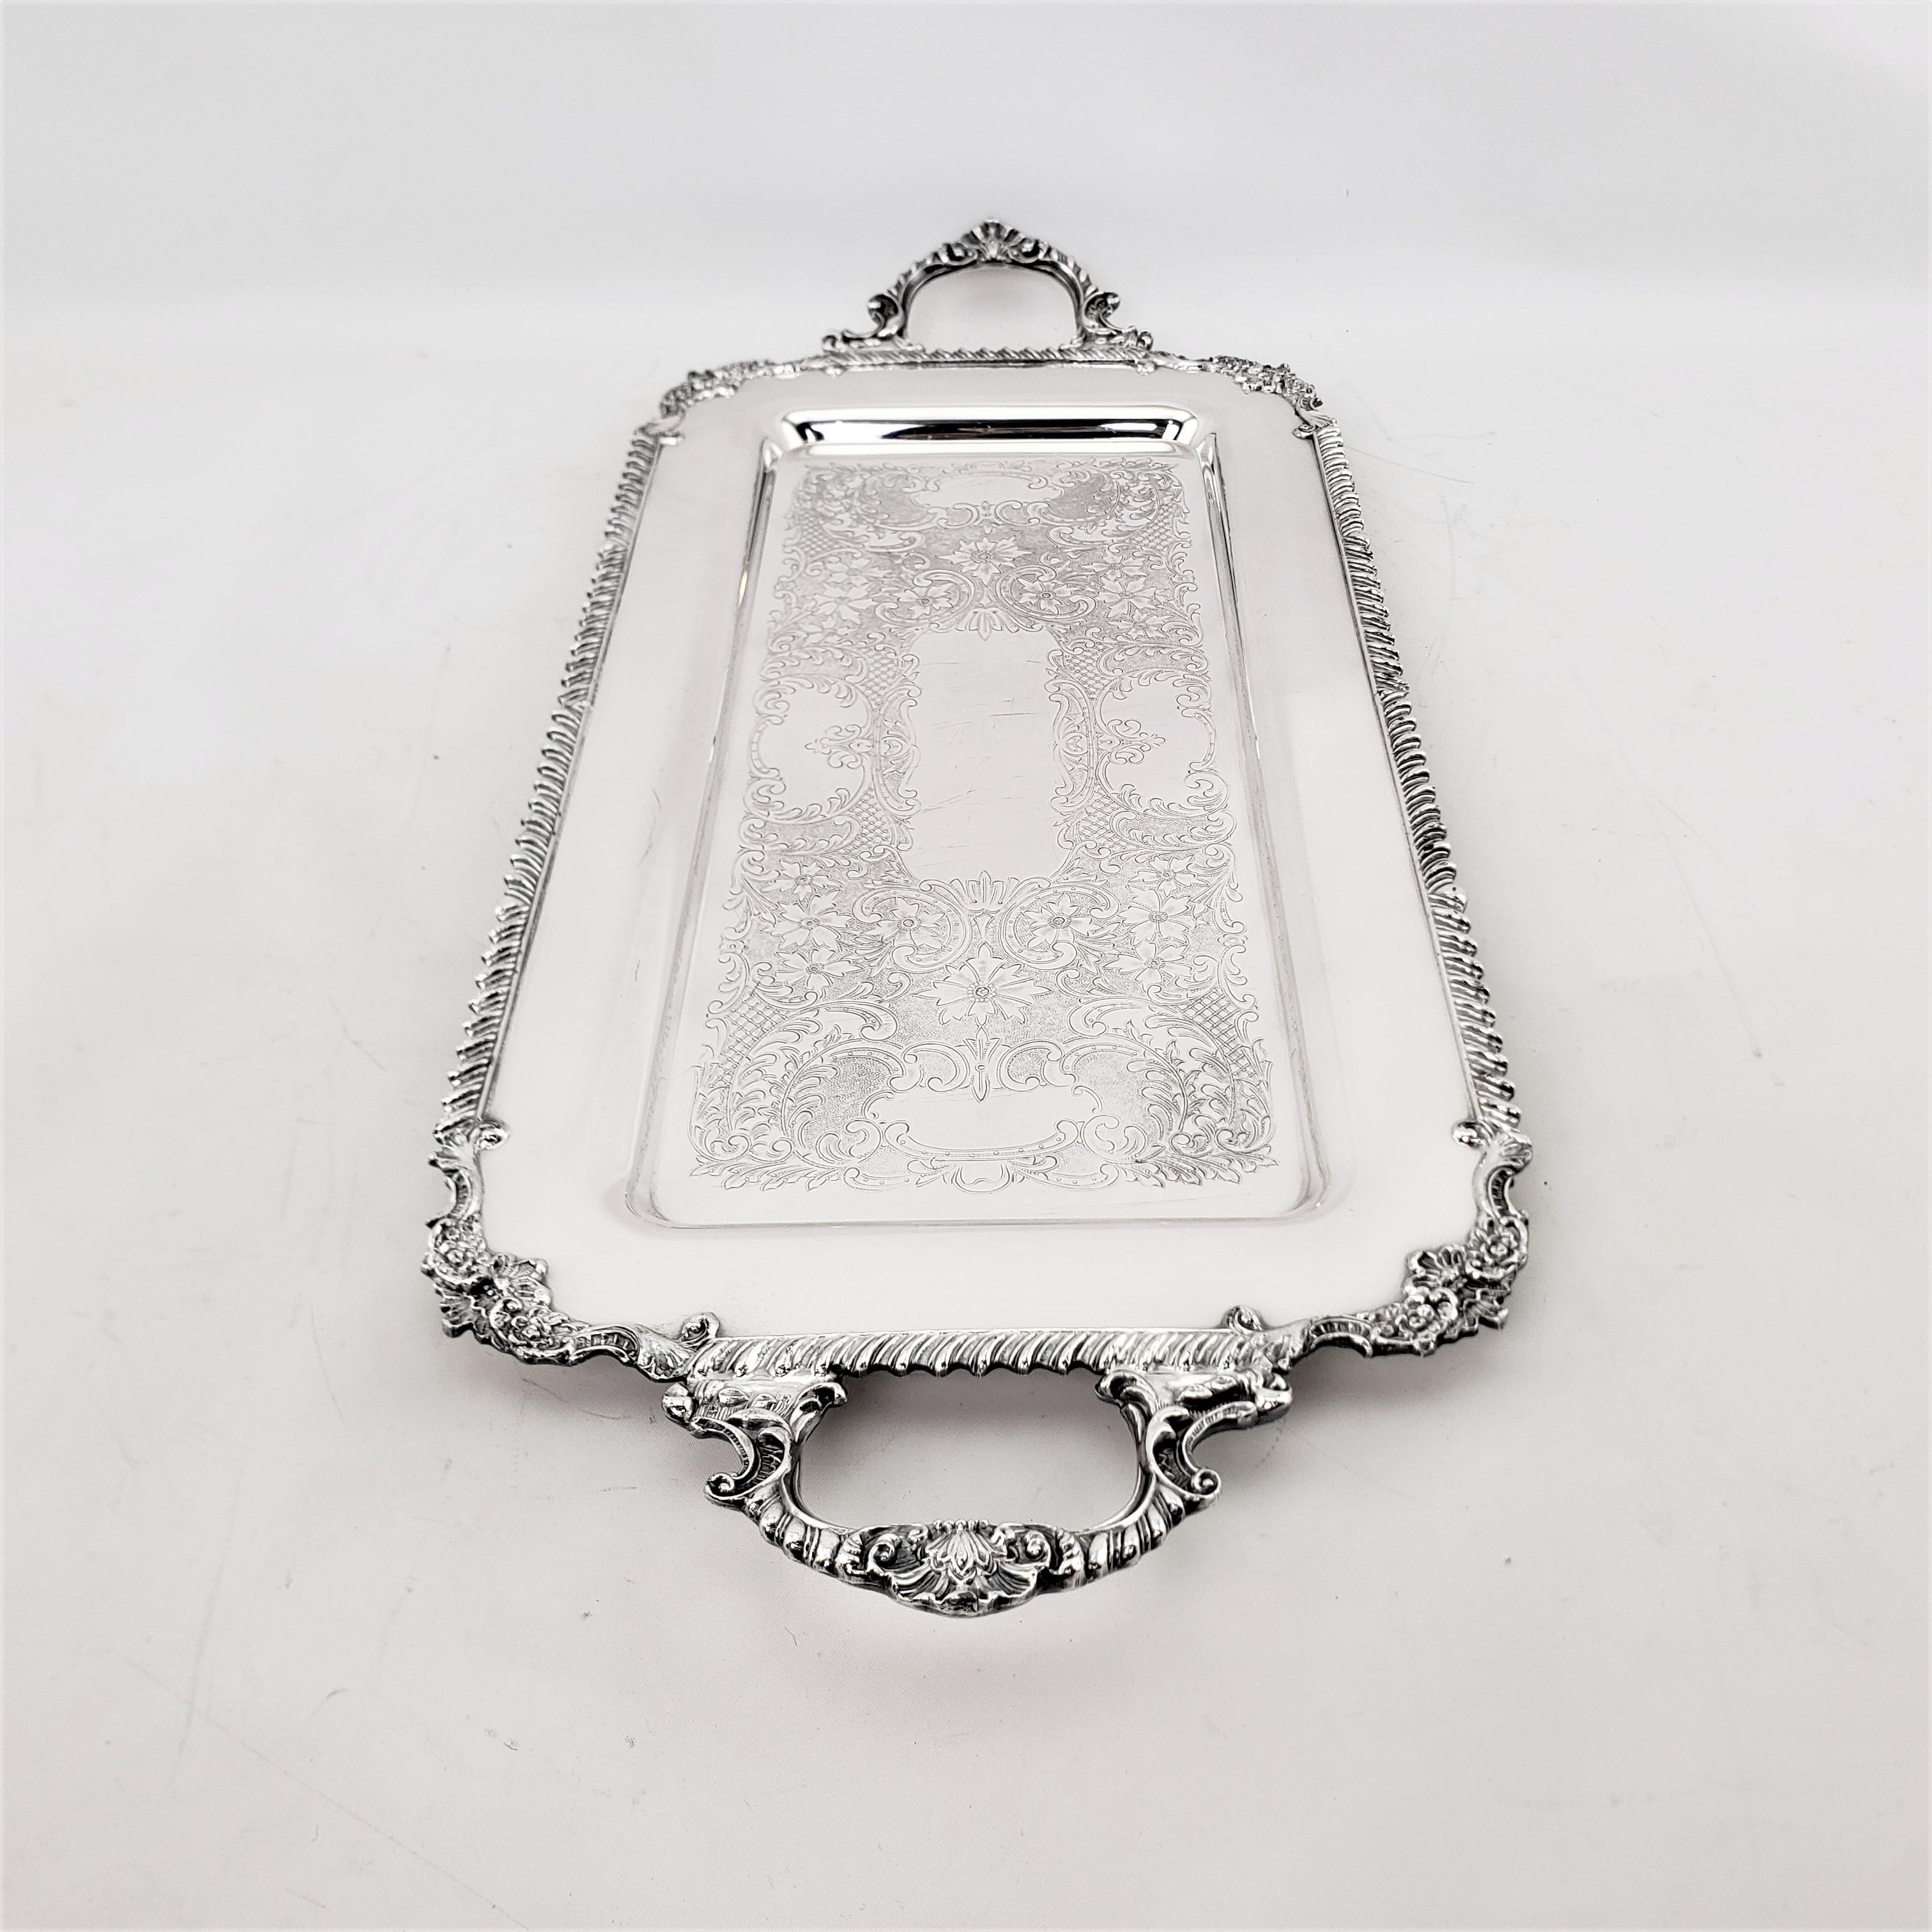 20th Century Antique Rectangular Silver Plated Serving Tray with Stylized Rope Decoration For Sale